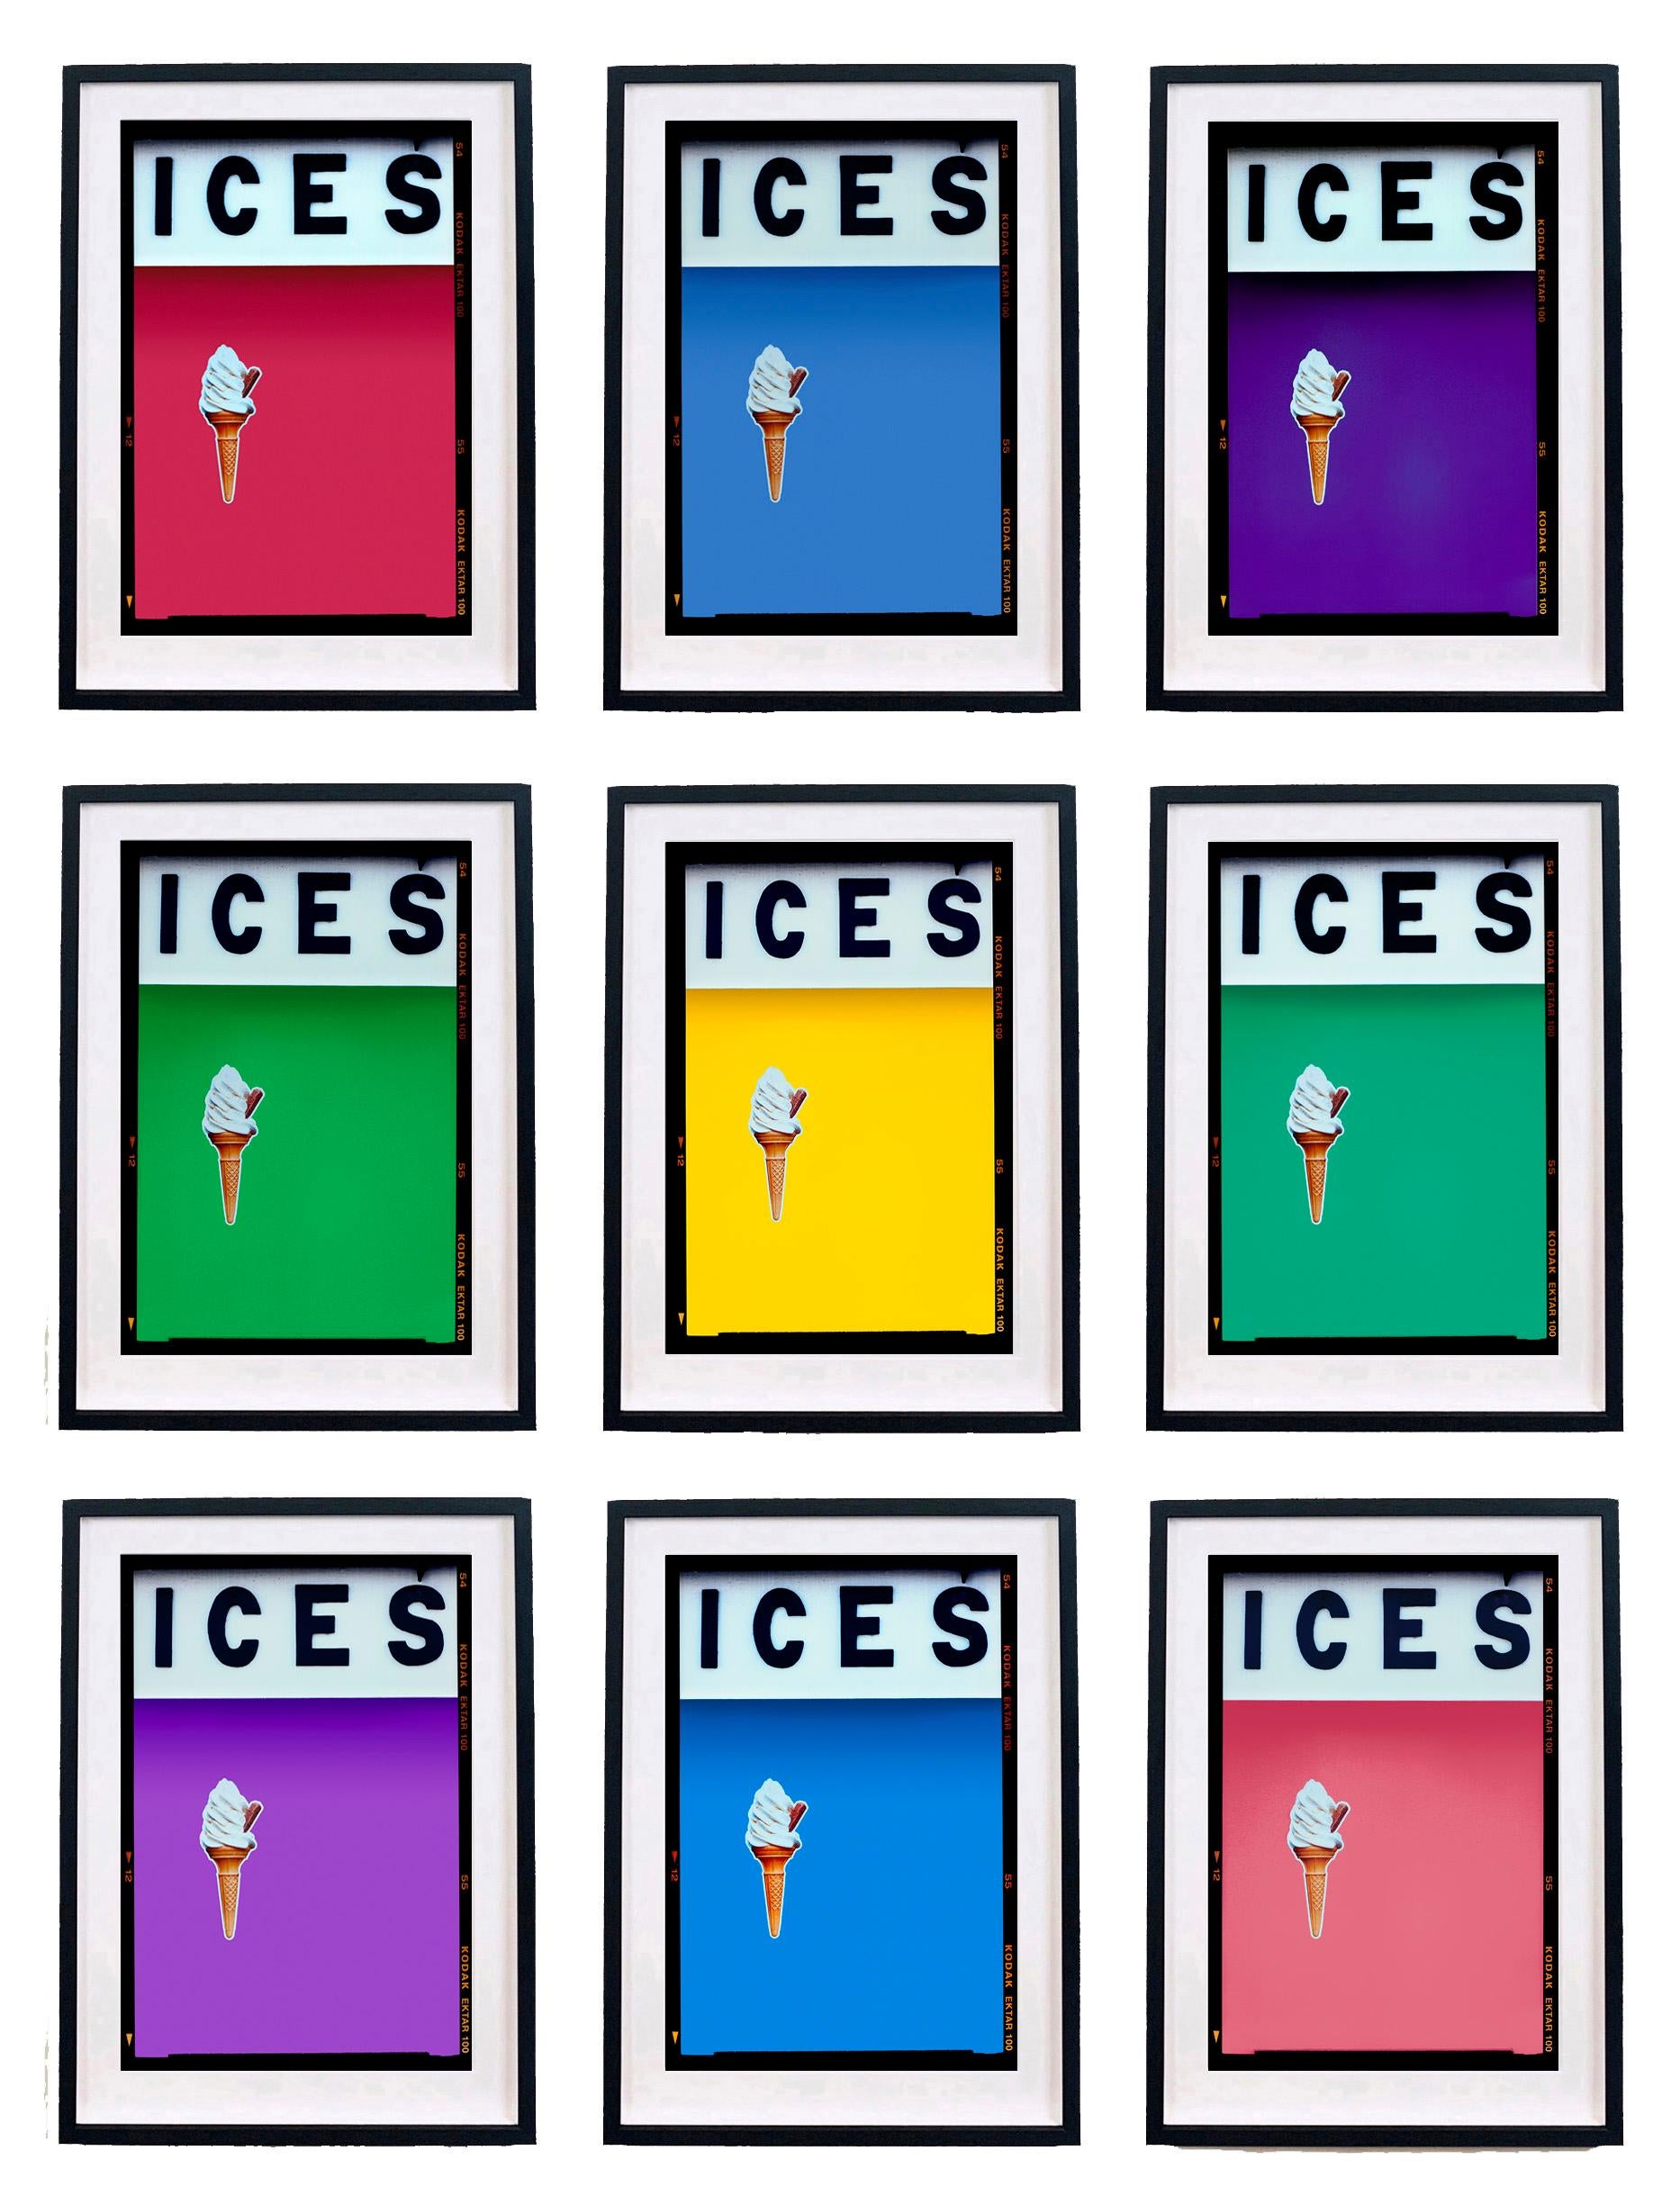 ICES, by Richard Heeps, photographed at the British Seaside at the end of summer 2020. This artwork is about evoking memories of the simple joy of days by the beach. The viridian green color blocking, typography and the surreal twist of the